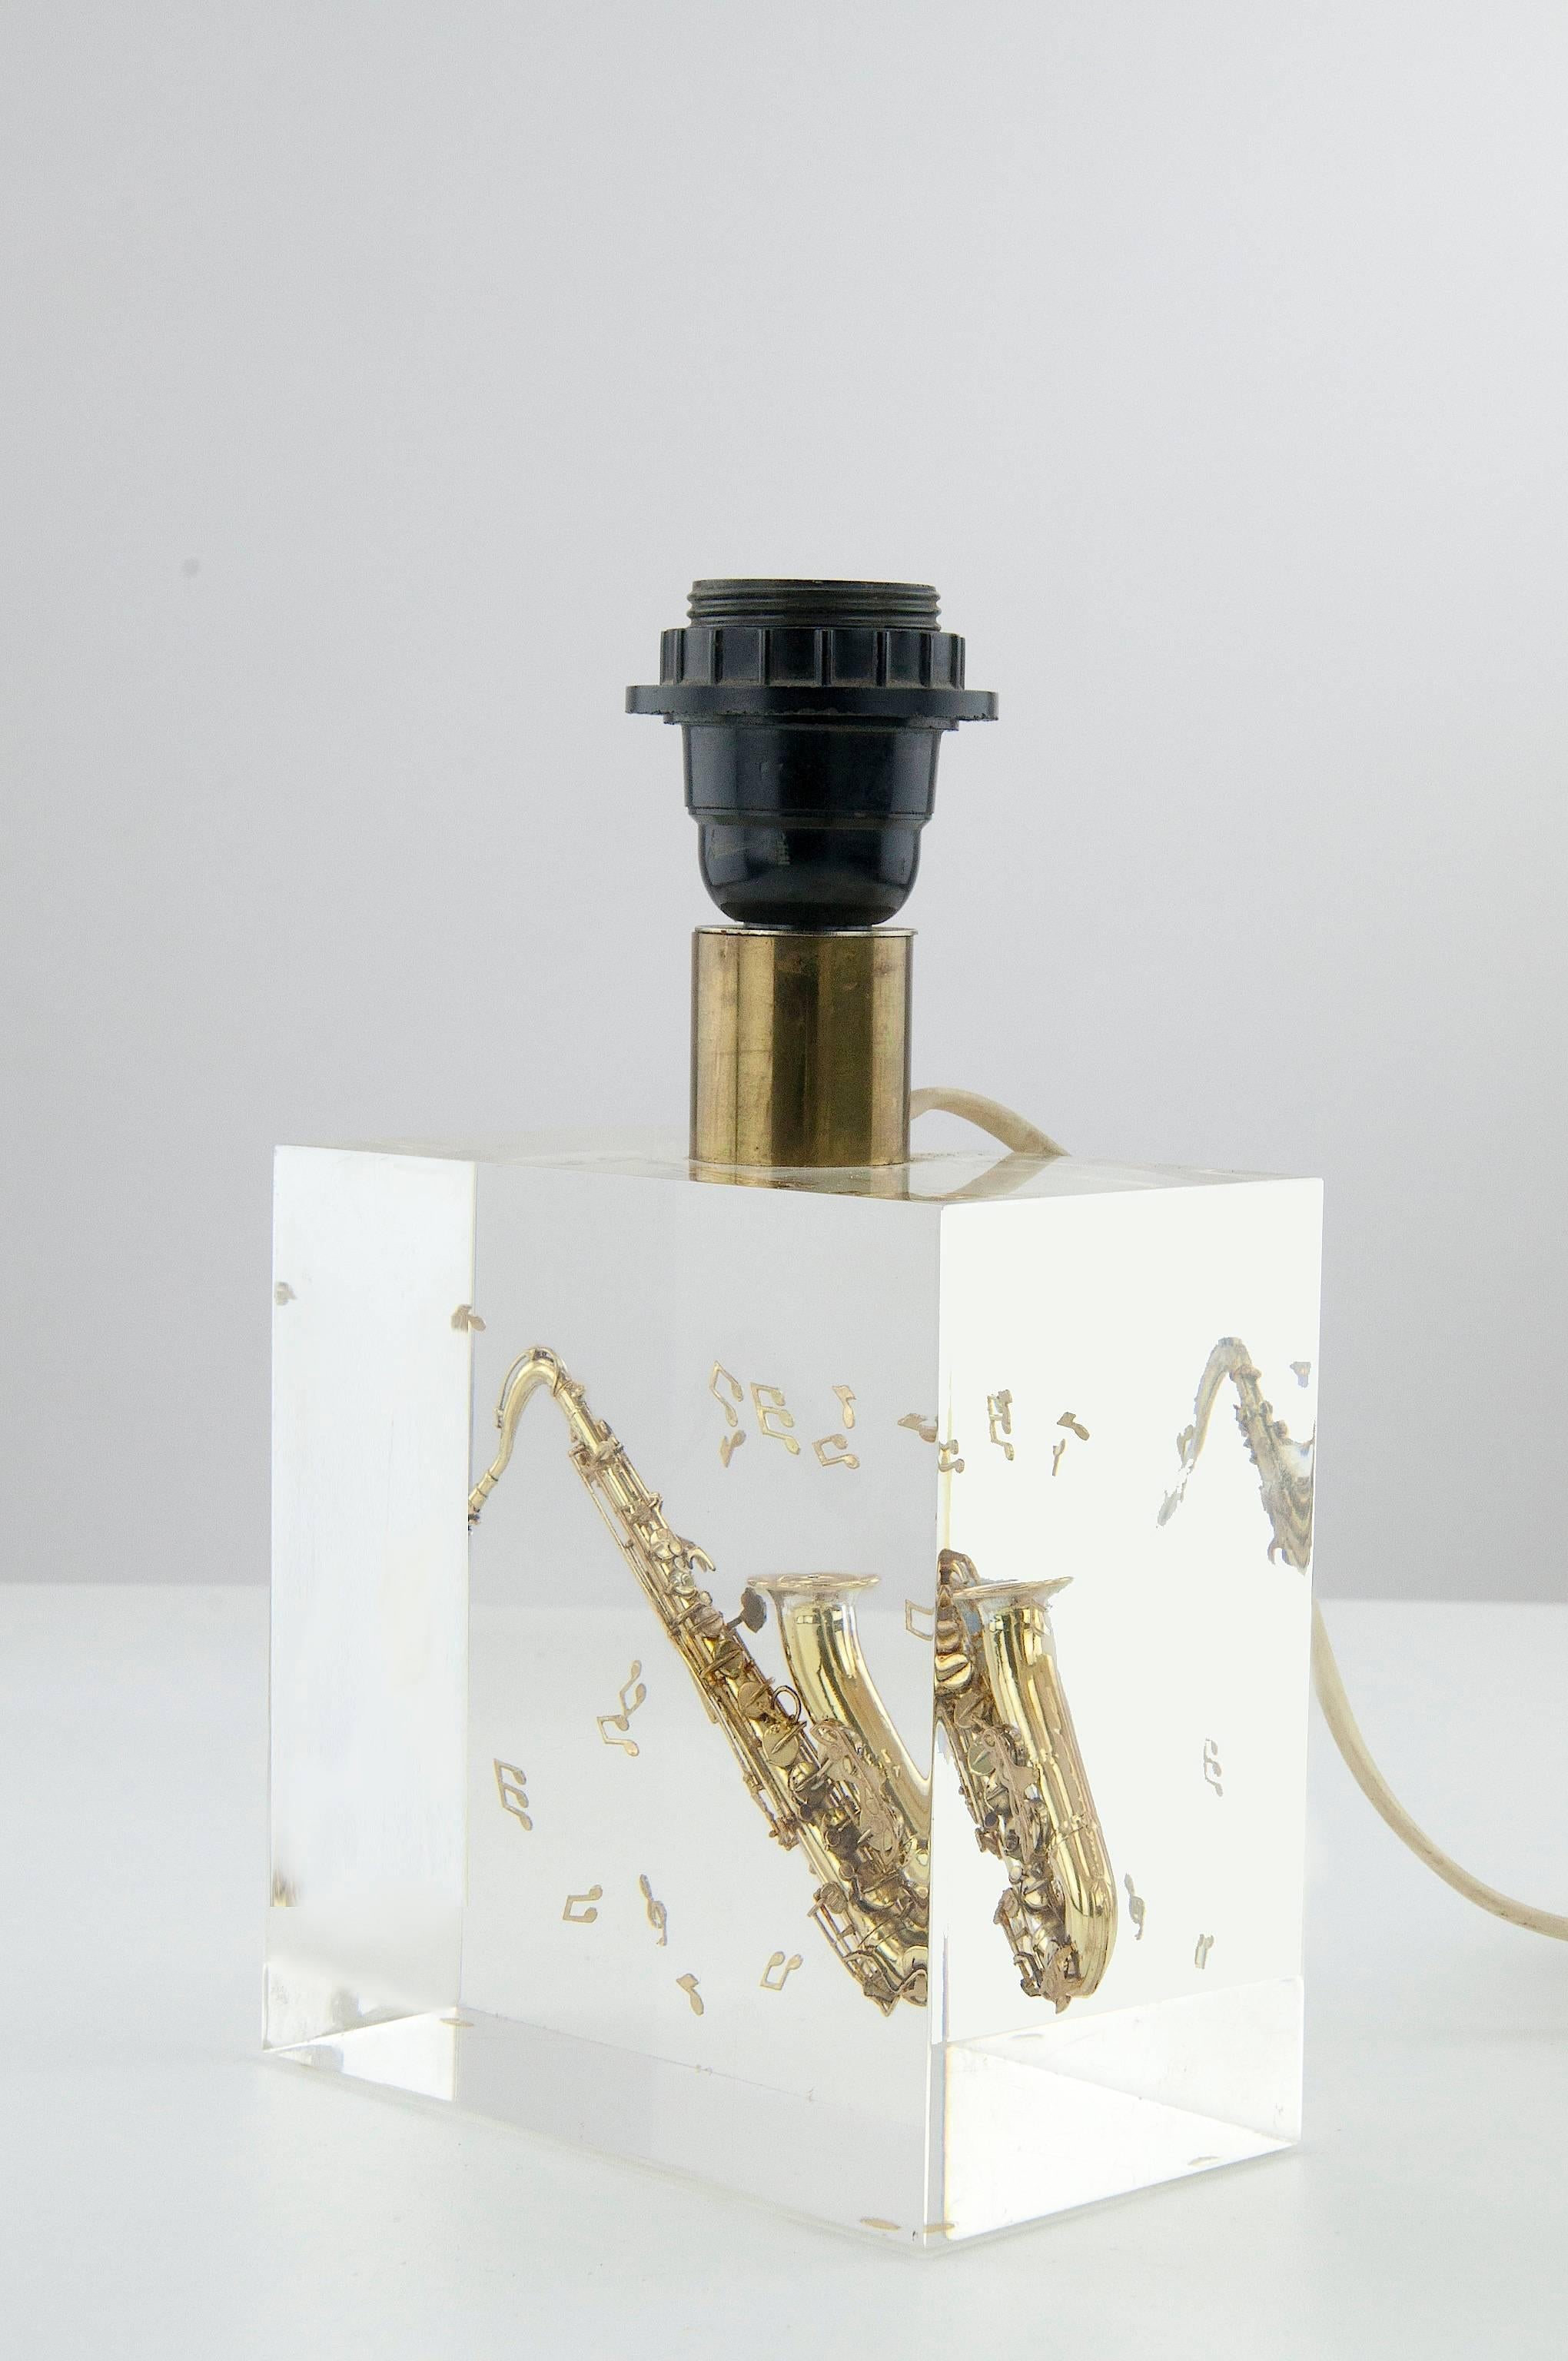 Brass Resin Table Lamp with an Inclusion of a Saxophone